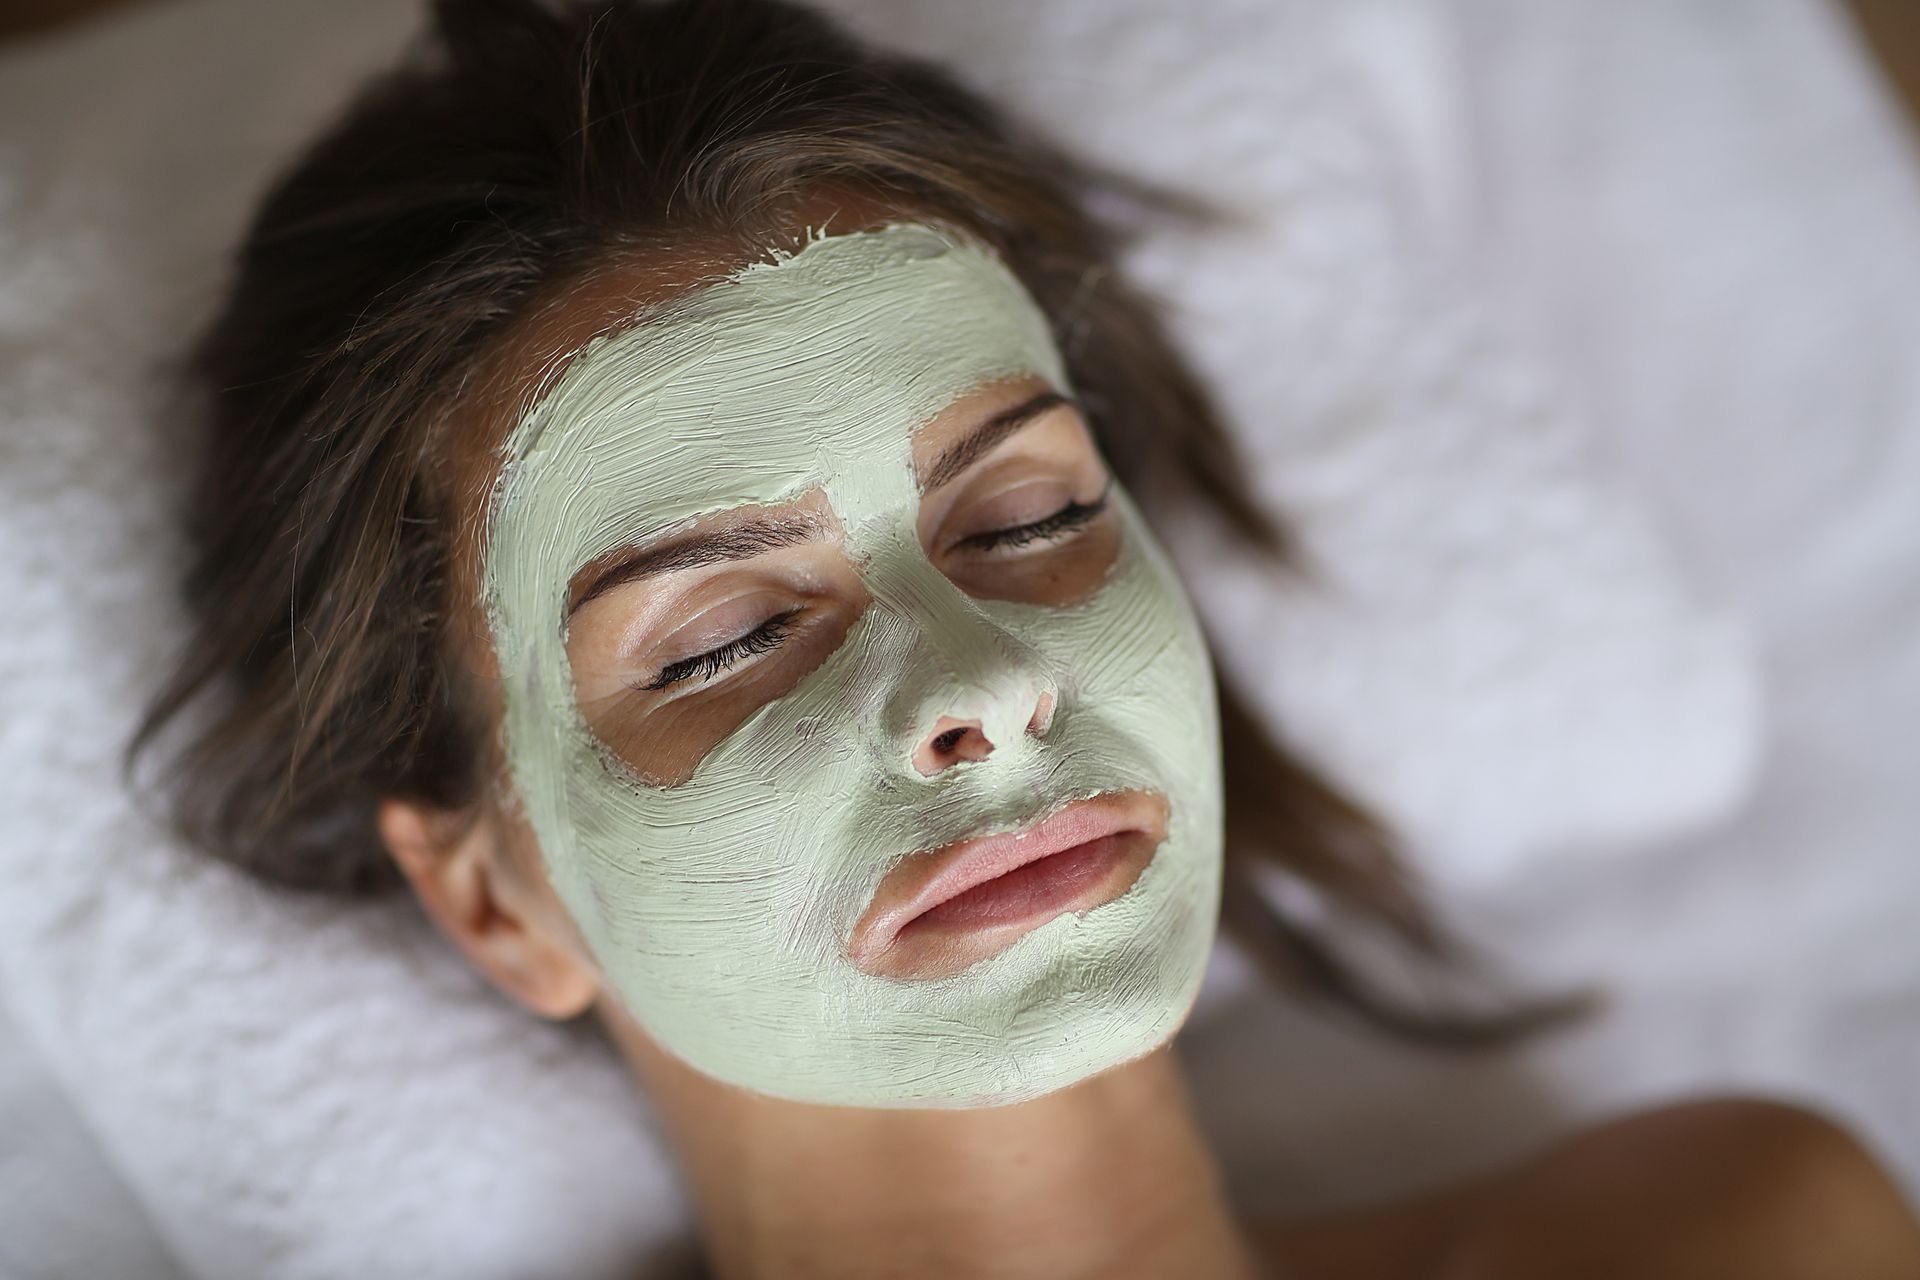 A woman is laying on a bed with a green mask on her face.